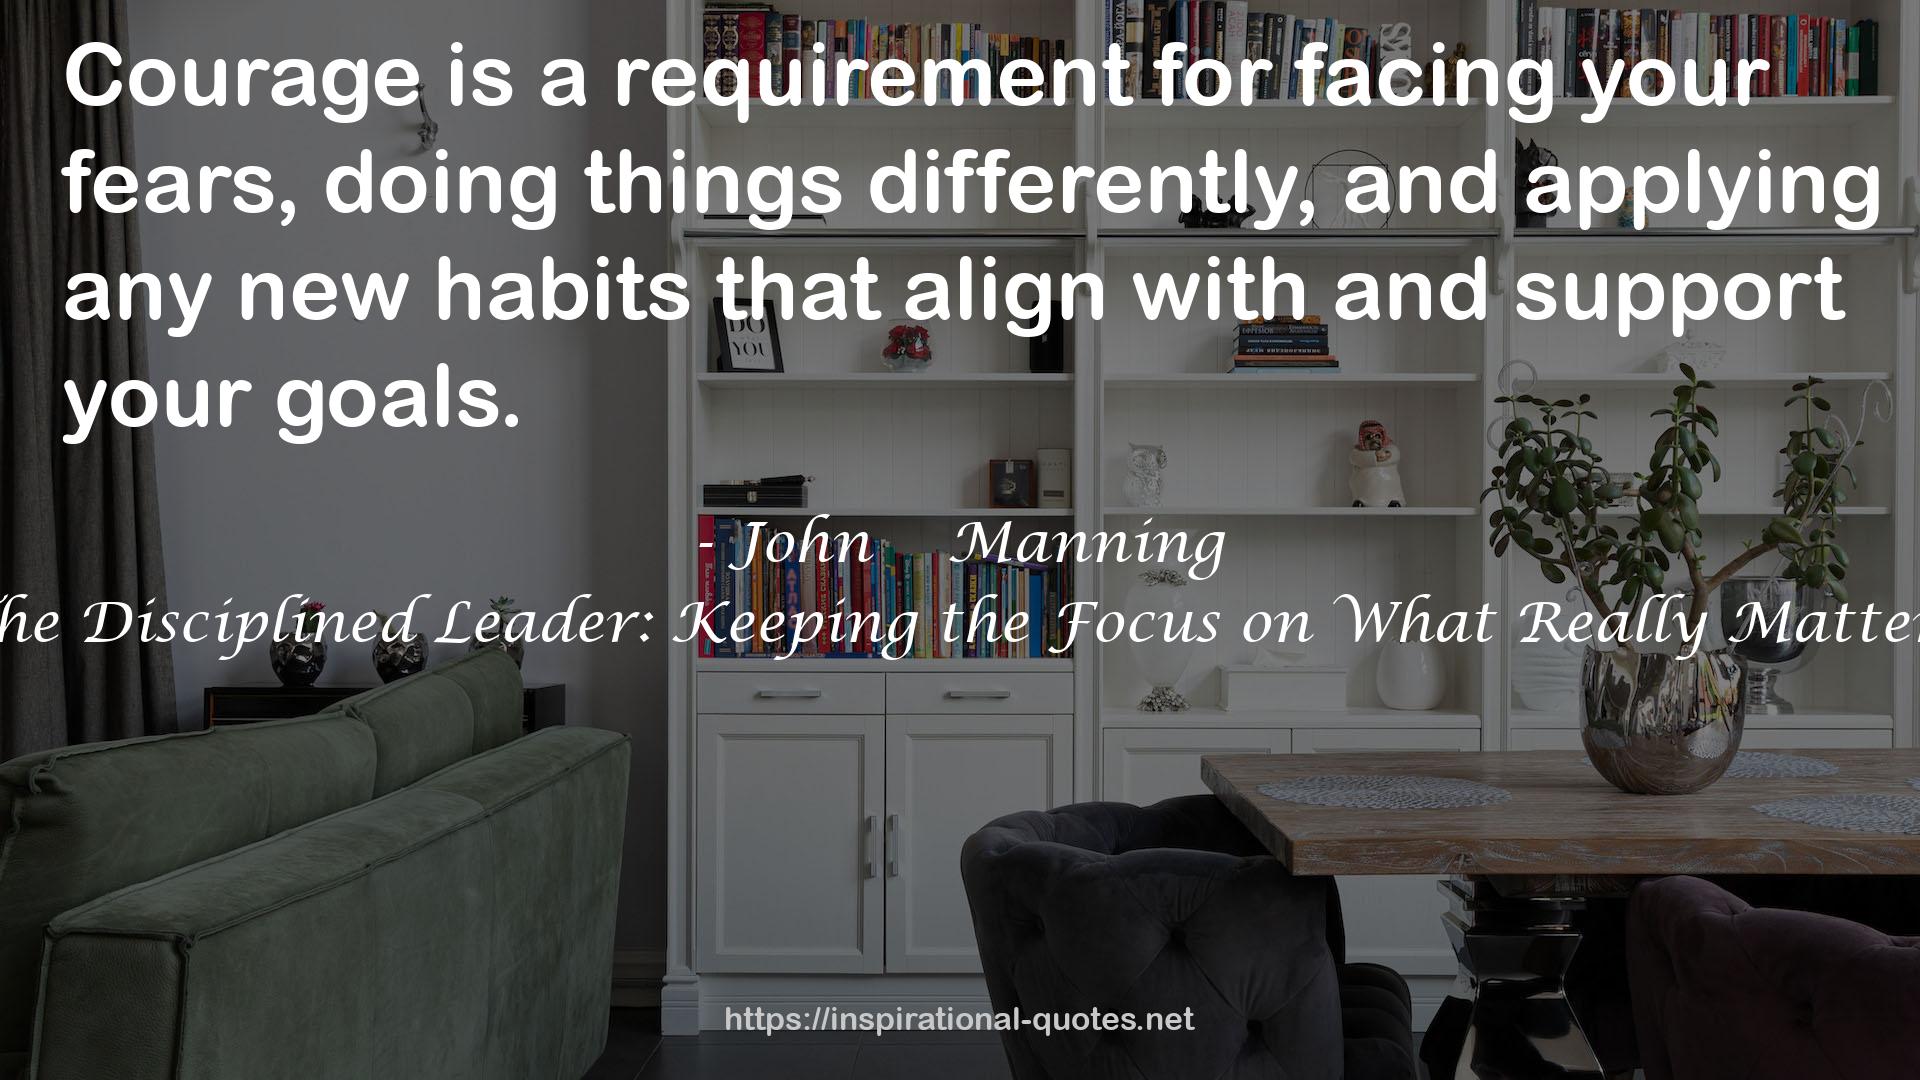 The Disciplined Leader: Keeping the Focus on What Really Matters QUOTES